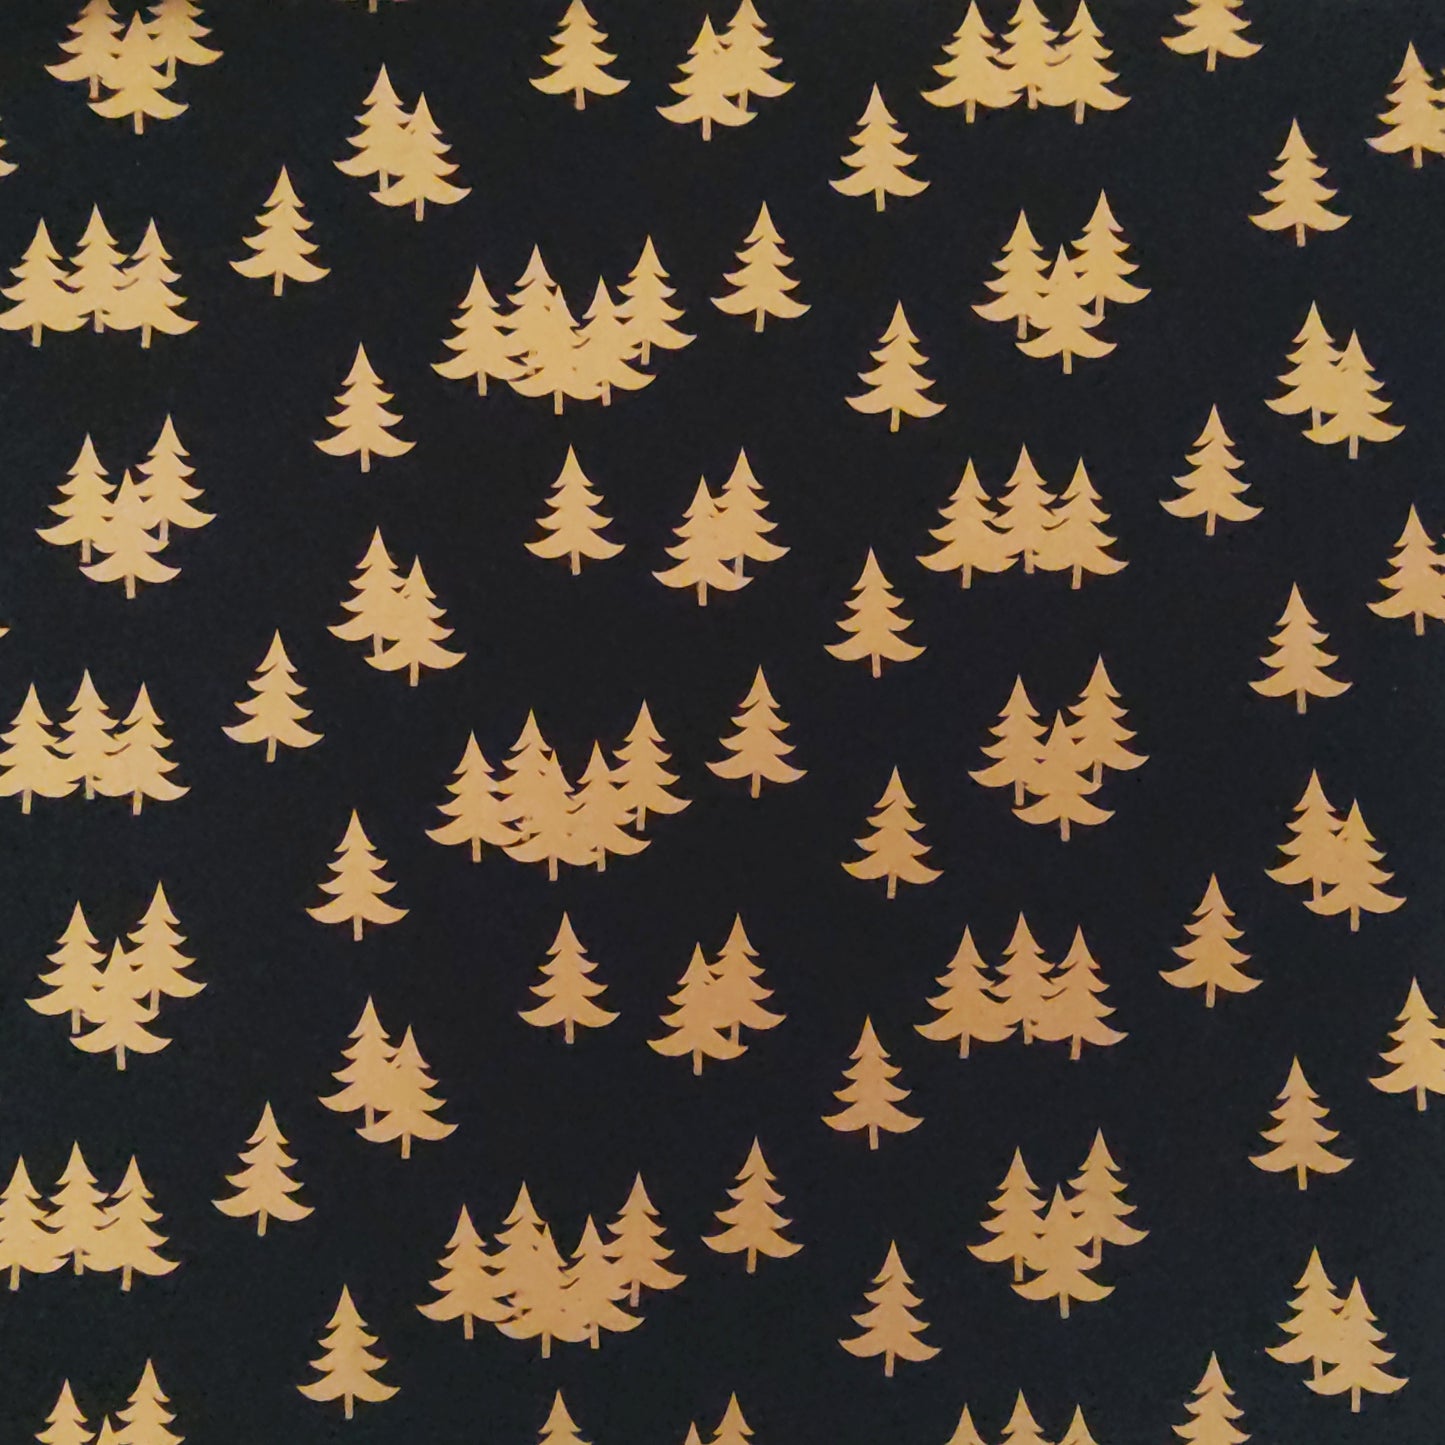 Gift Wrapping - Black and Gold